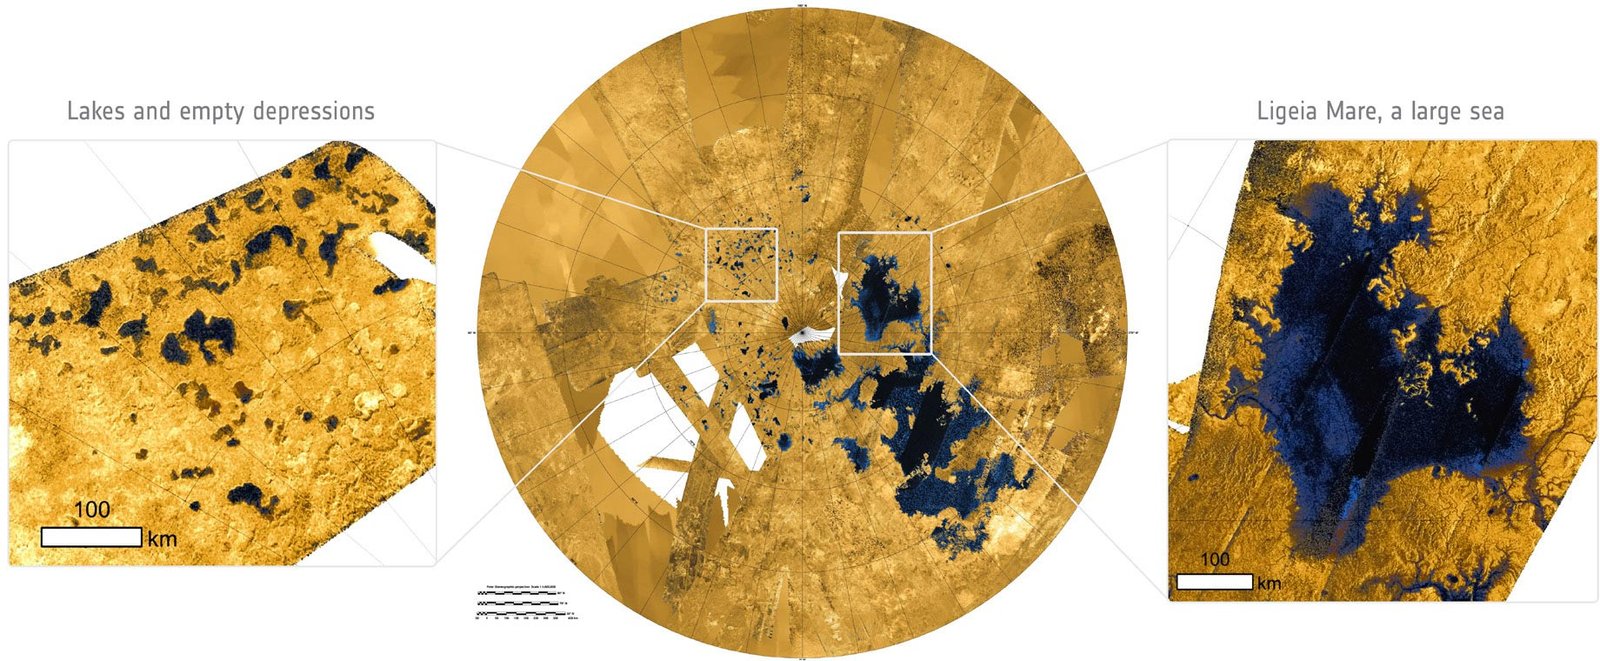 Titan’s Mysterious “Magic Islands” – Honeycombed Hydrocarbon Icebergs on Saturn’s Largest Moon